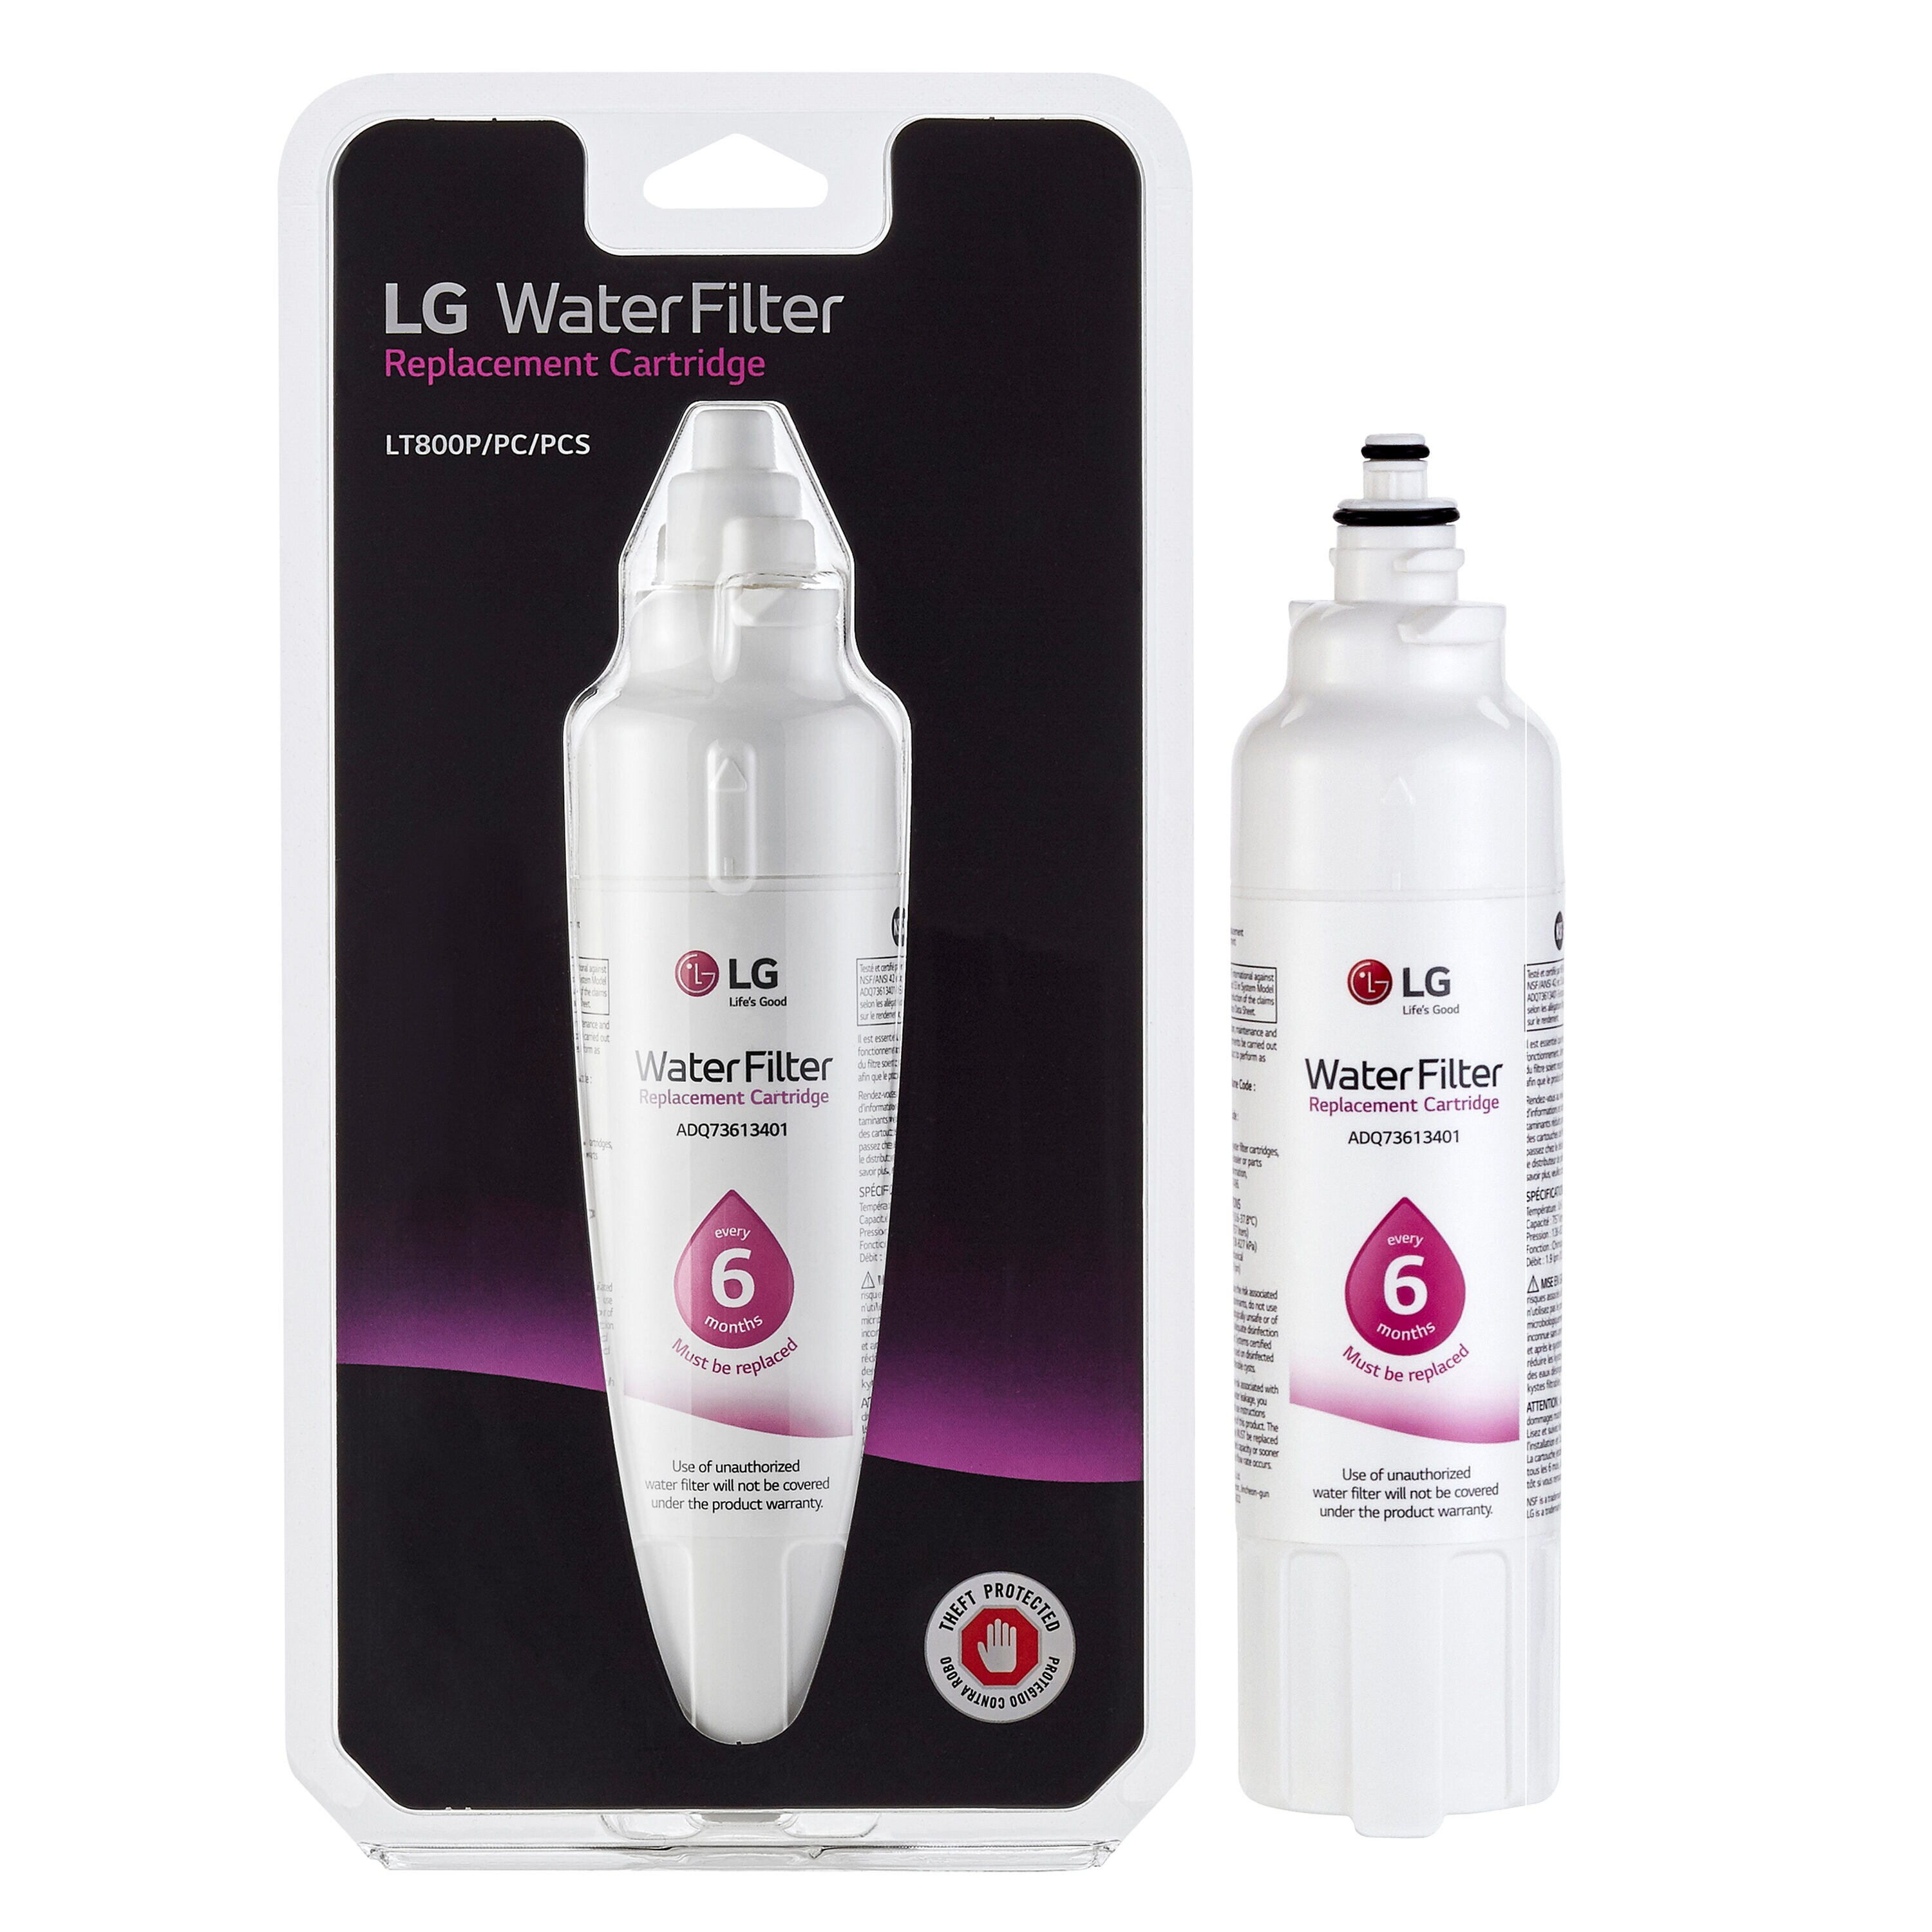 LG Twist-in Refrigerator Water Filter fits LT800P at Lowes.com